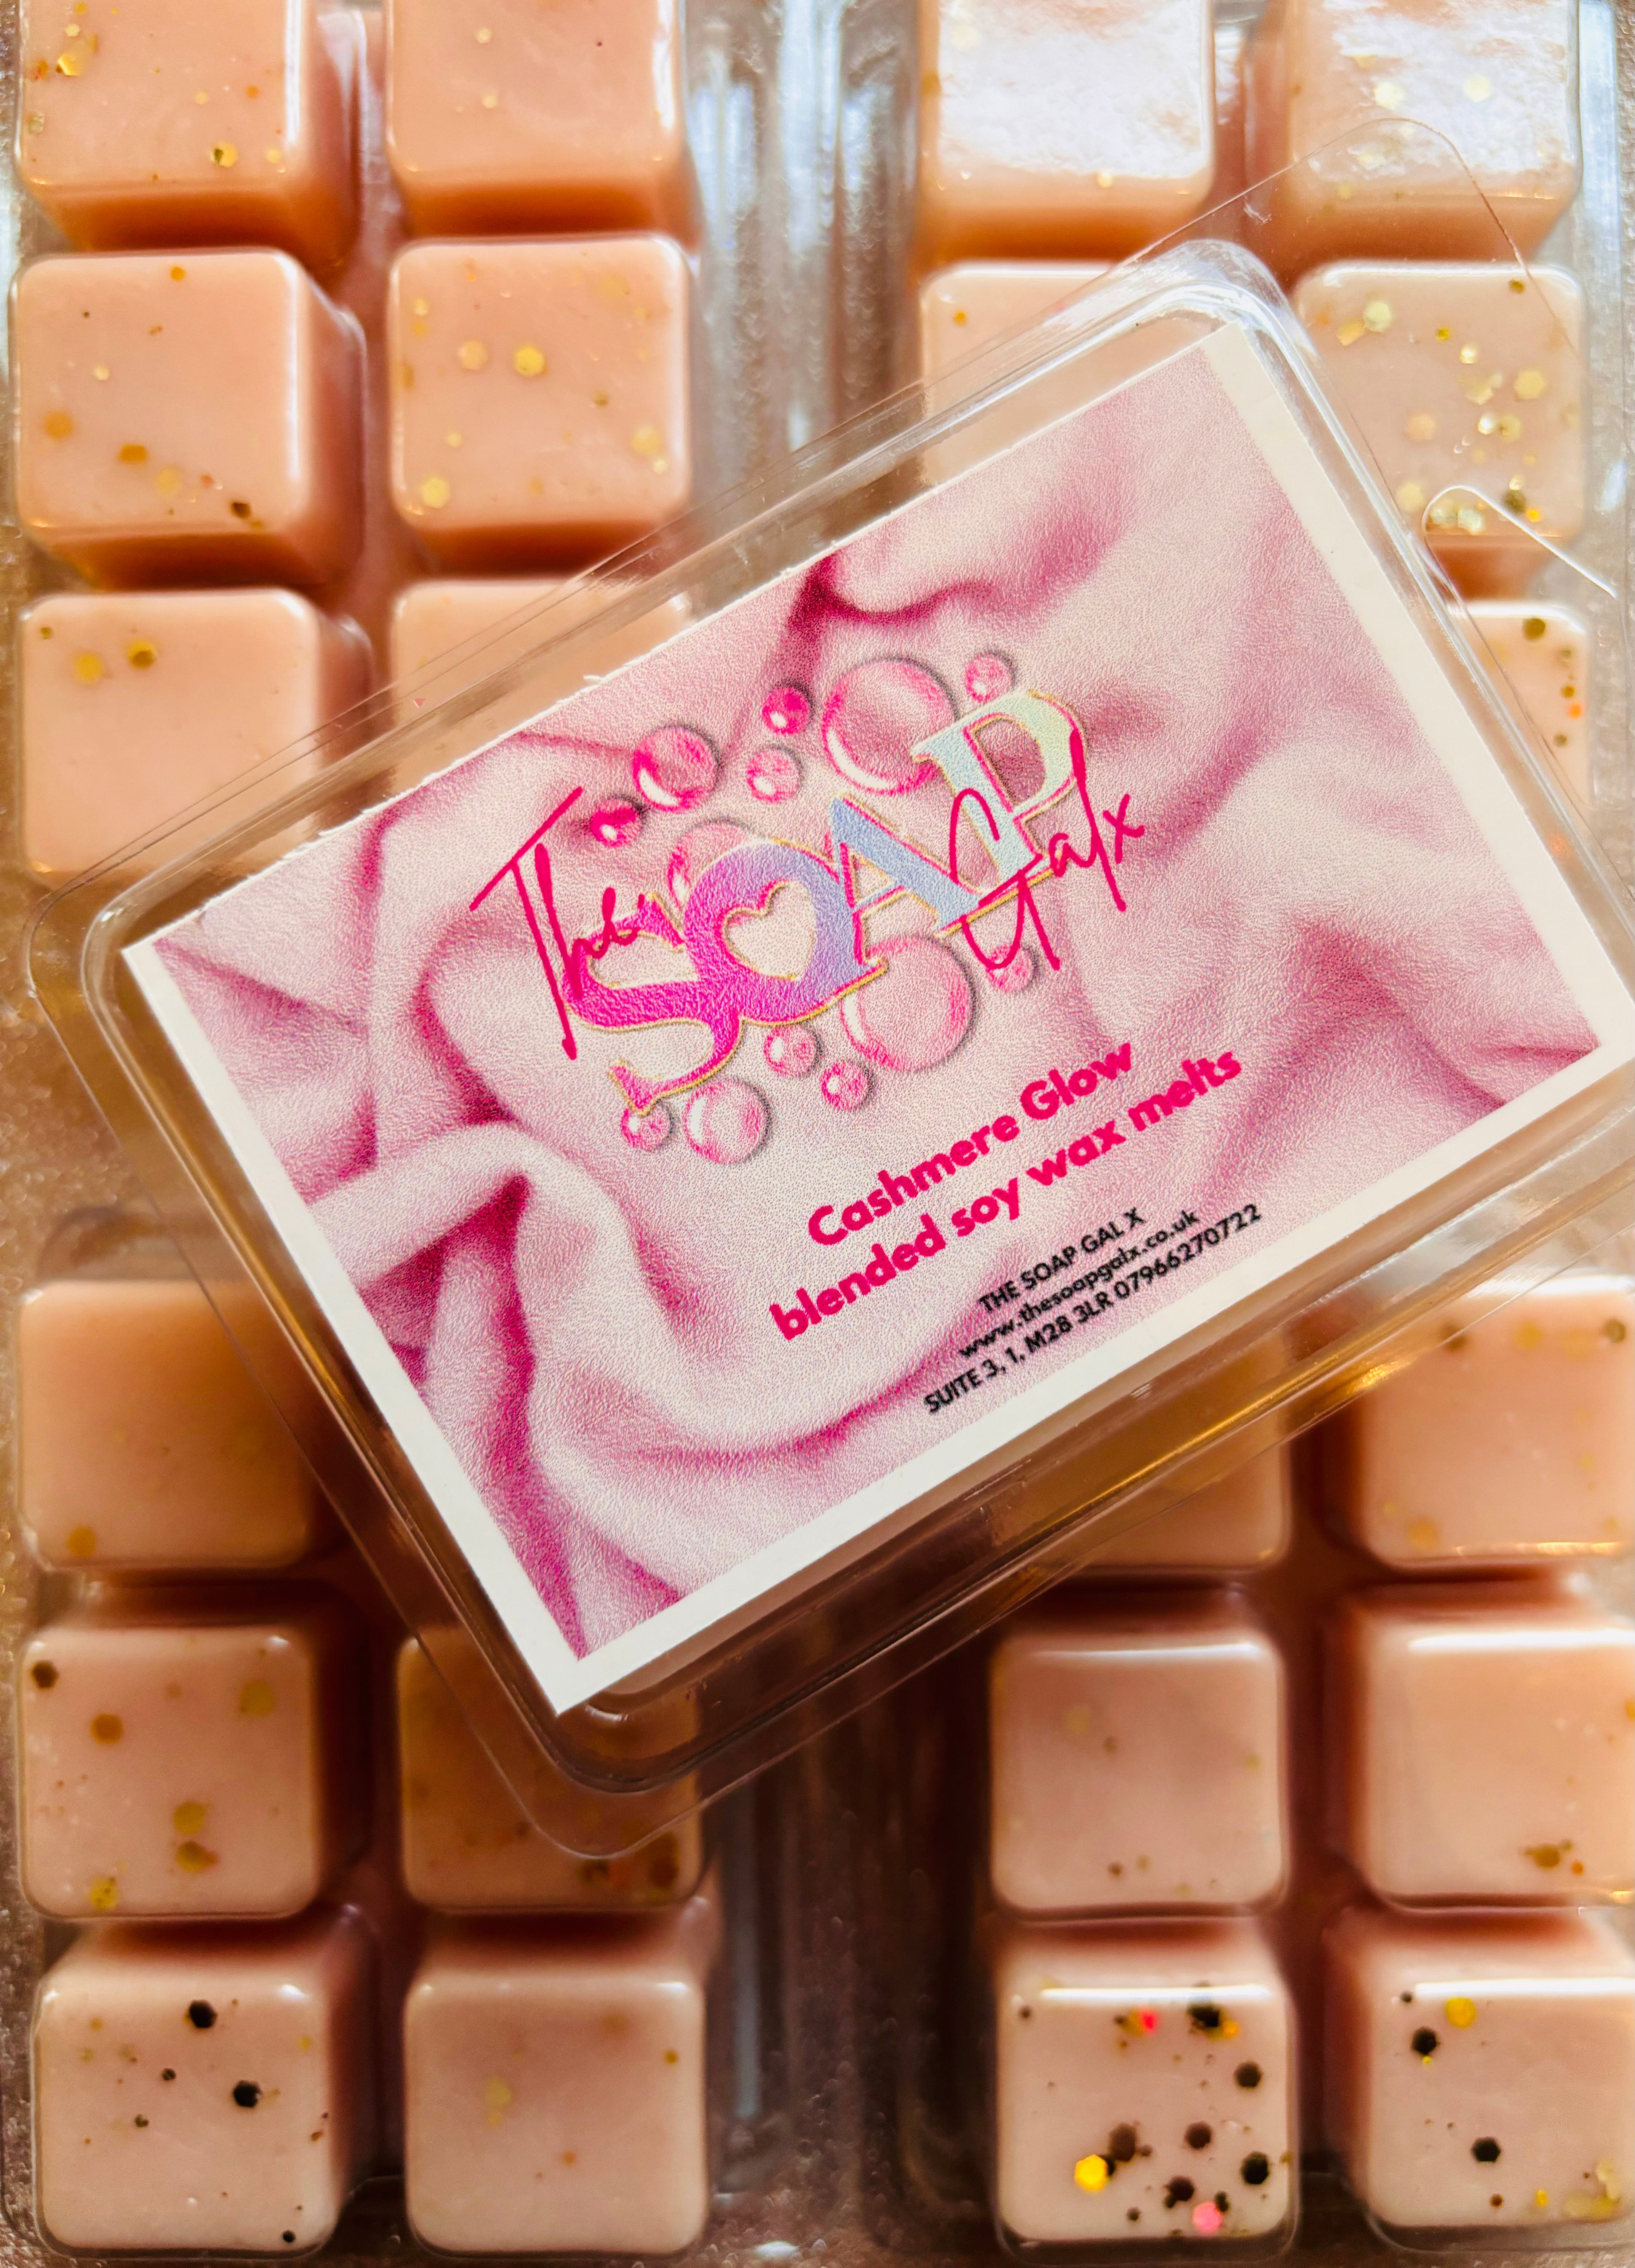 A box of pink Cashmere Glow scented soy wax cubes (Cashmere Glow Soy Wax Melts by The Soap Gal) sitting on top of each other.